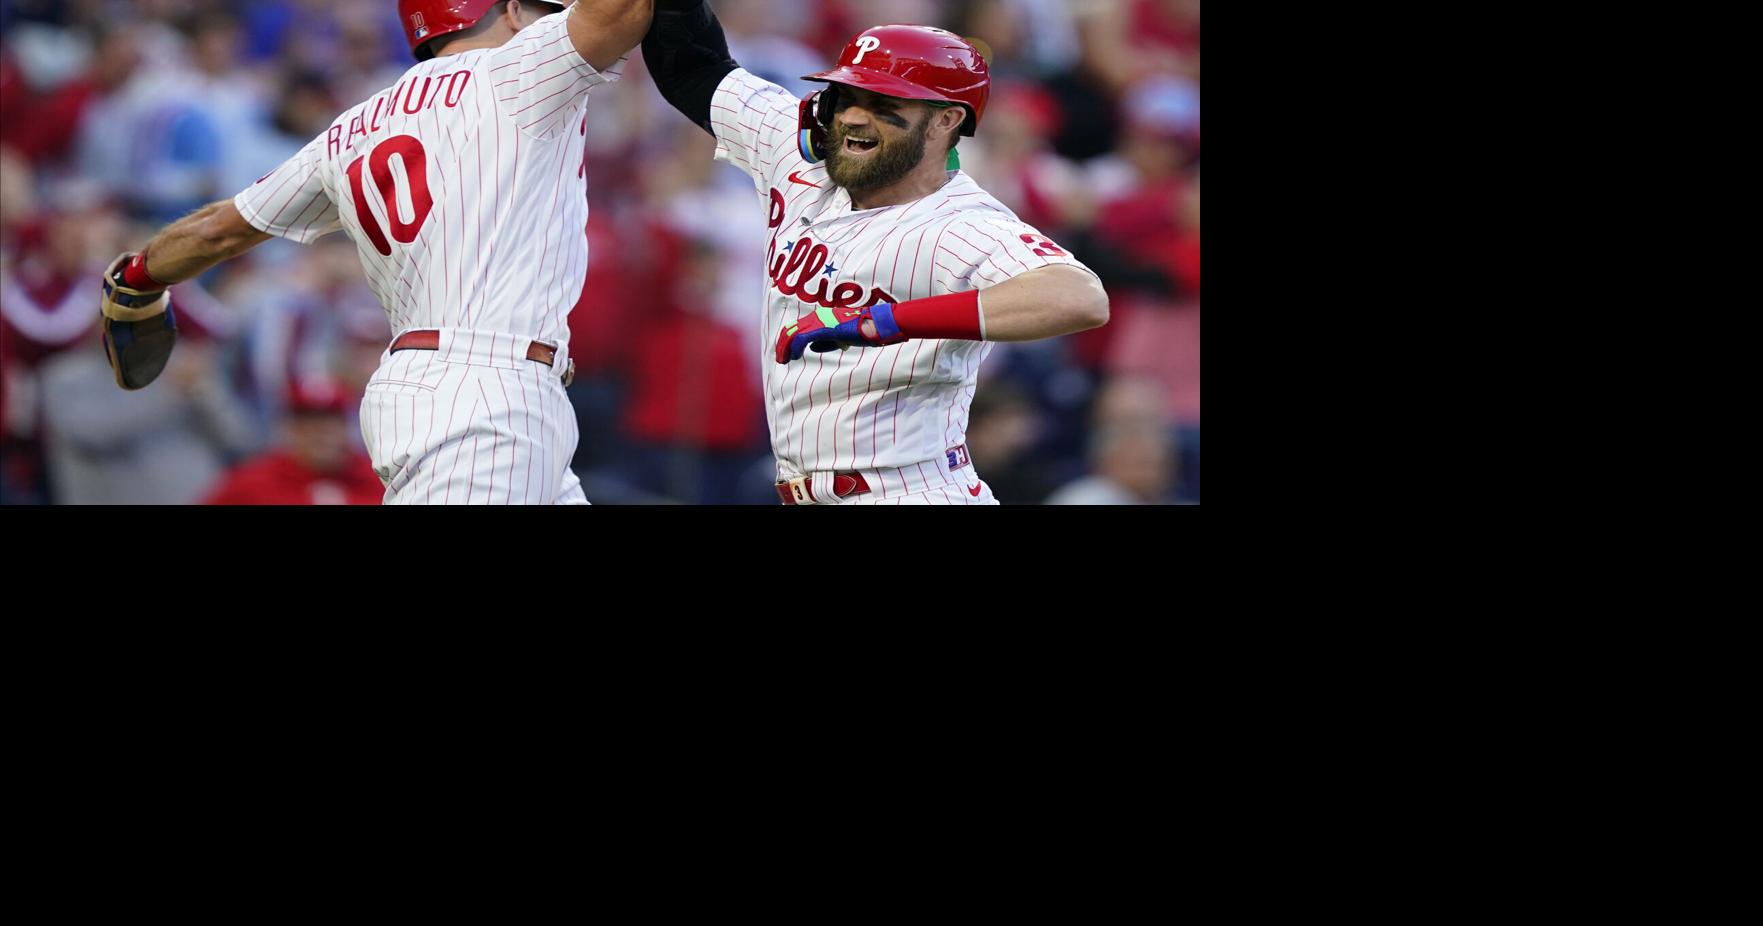 MLB playoffs: Phillies could clinch NLDS Thursday as Game 4 pushed